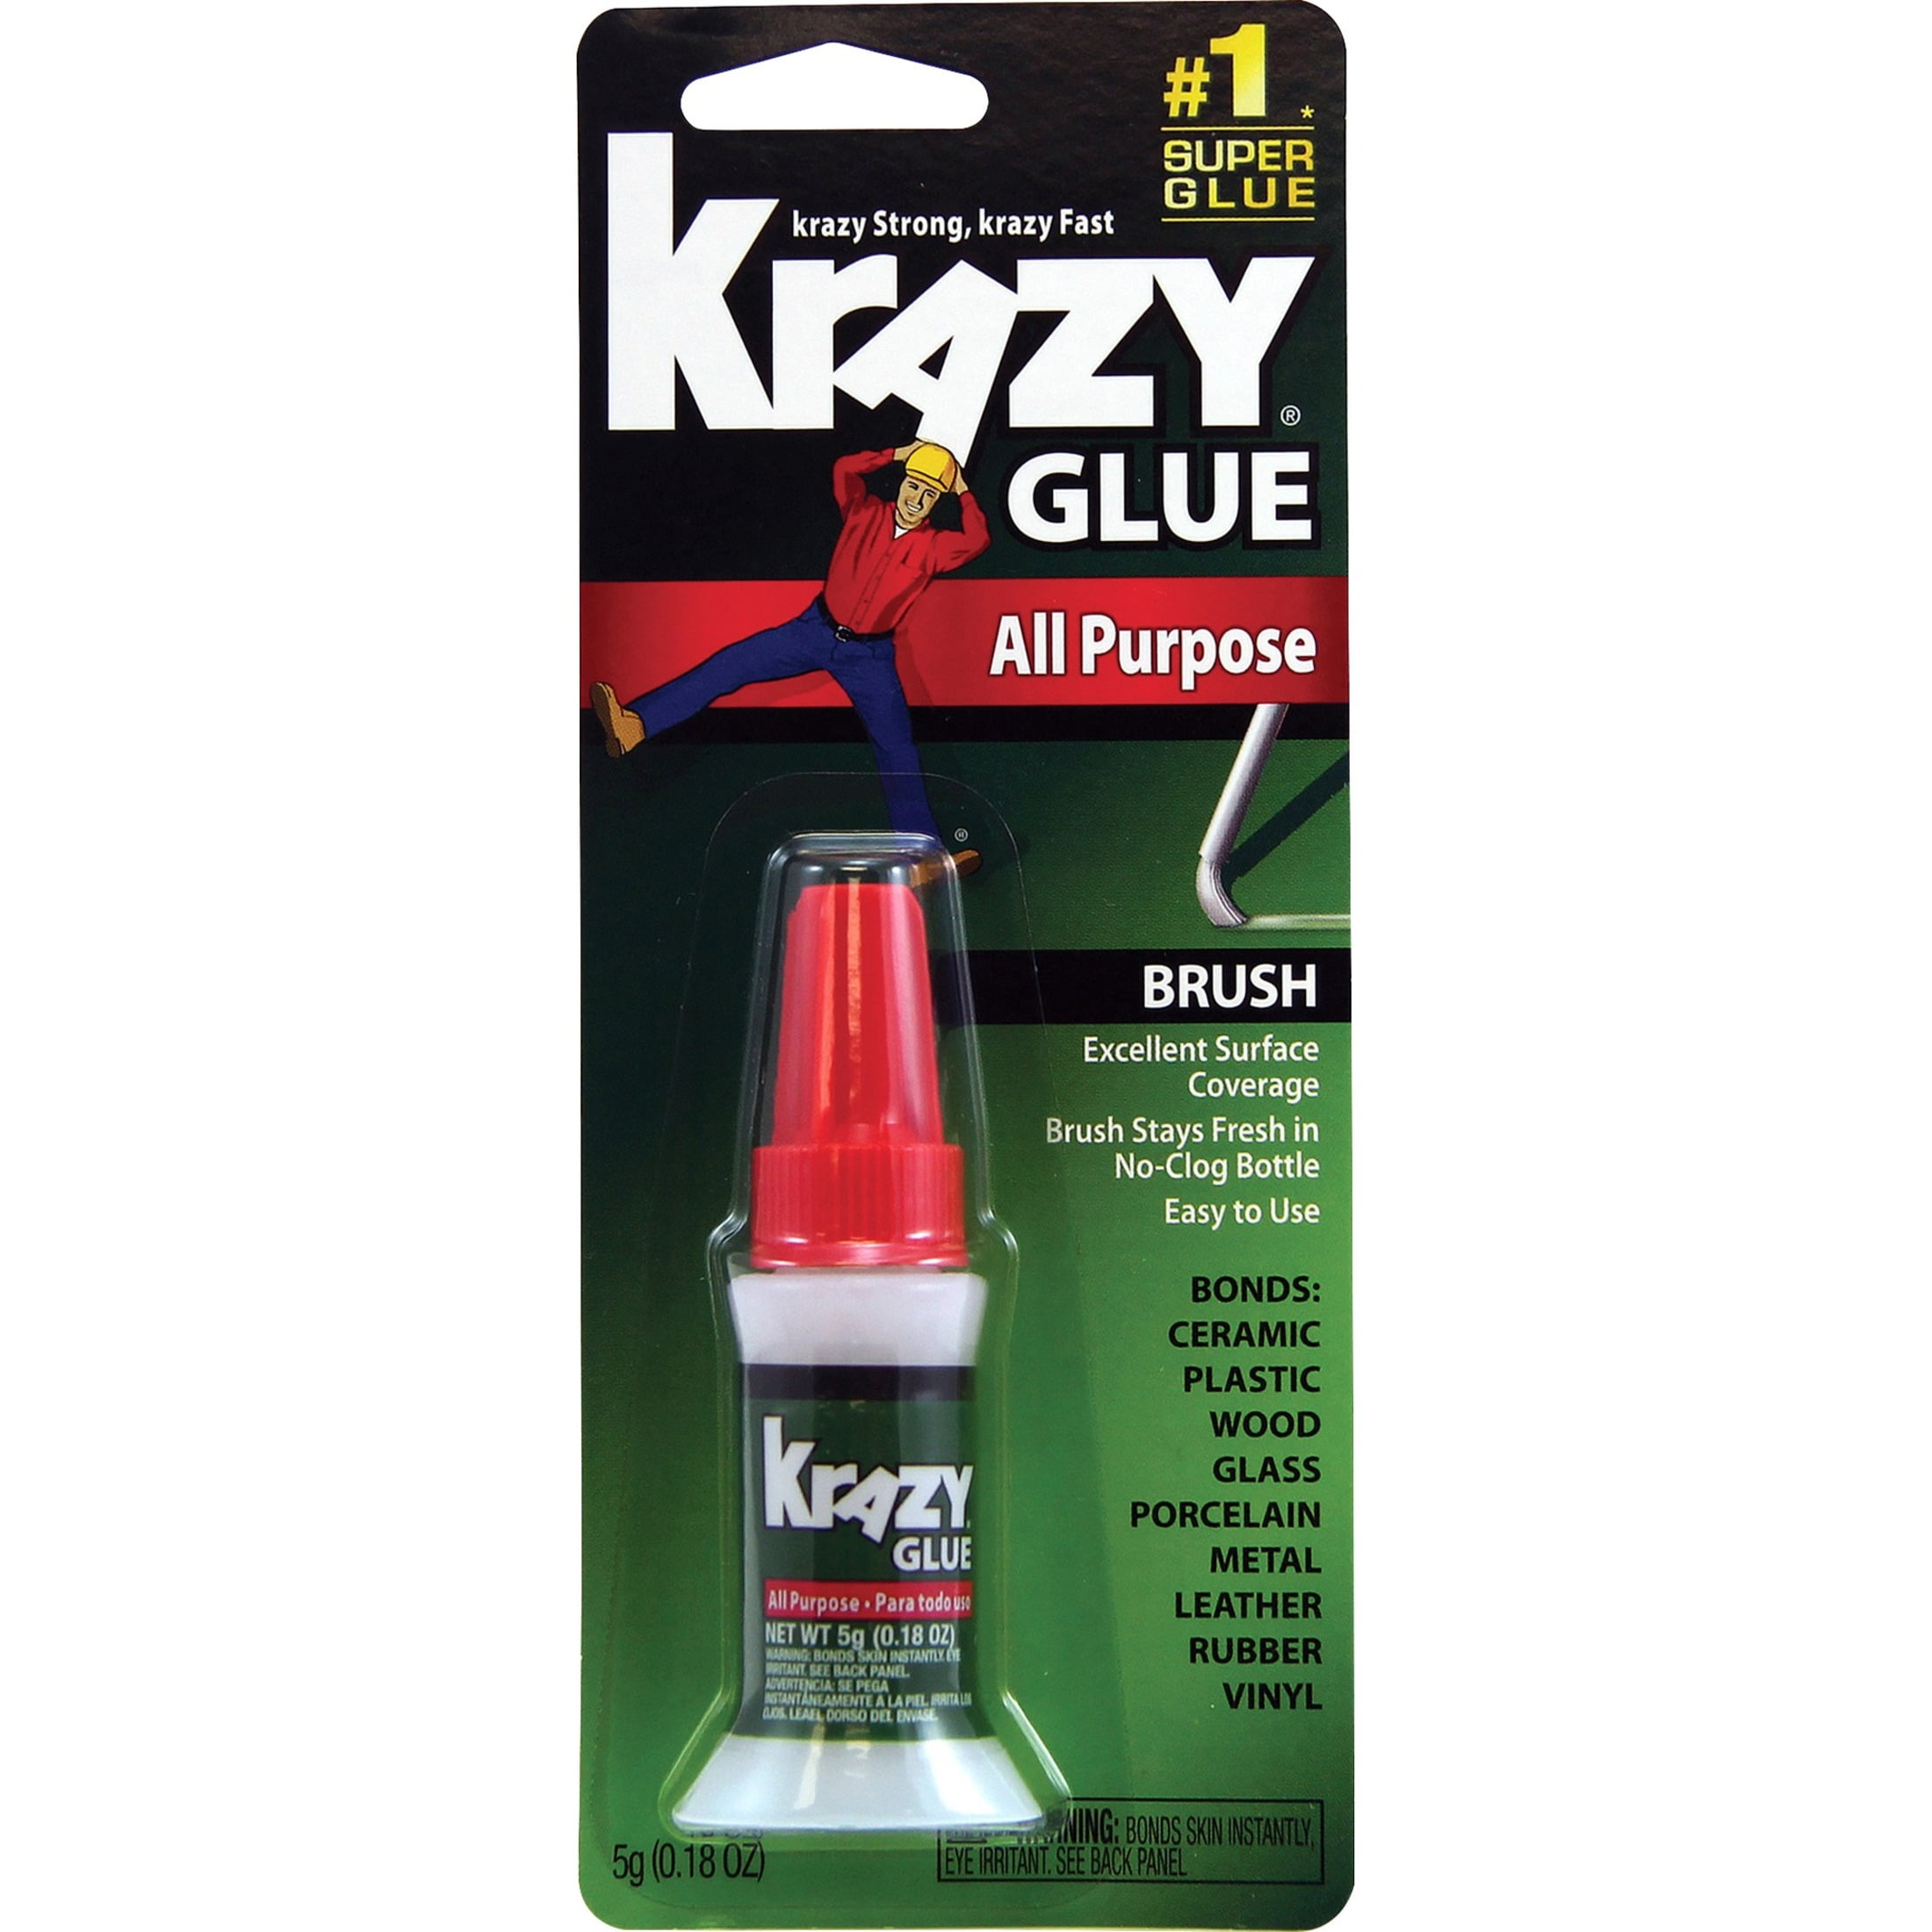 All Purpose Brush-On Krazy Glue, 0.17 Oz, Dries Clear